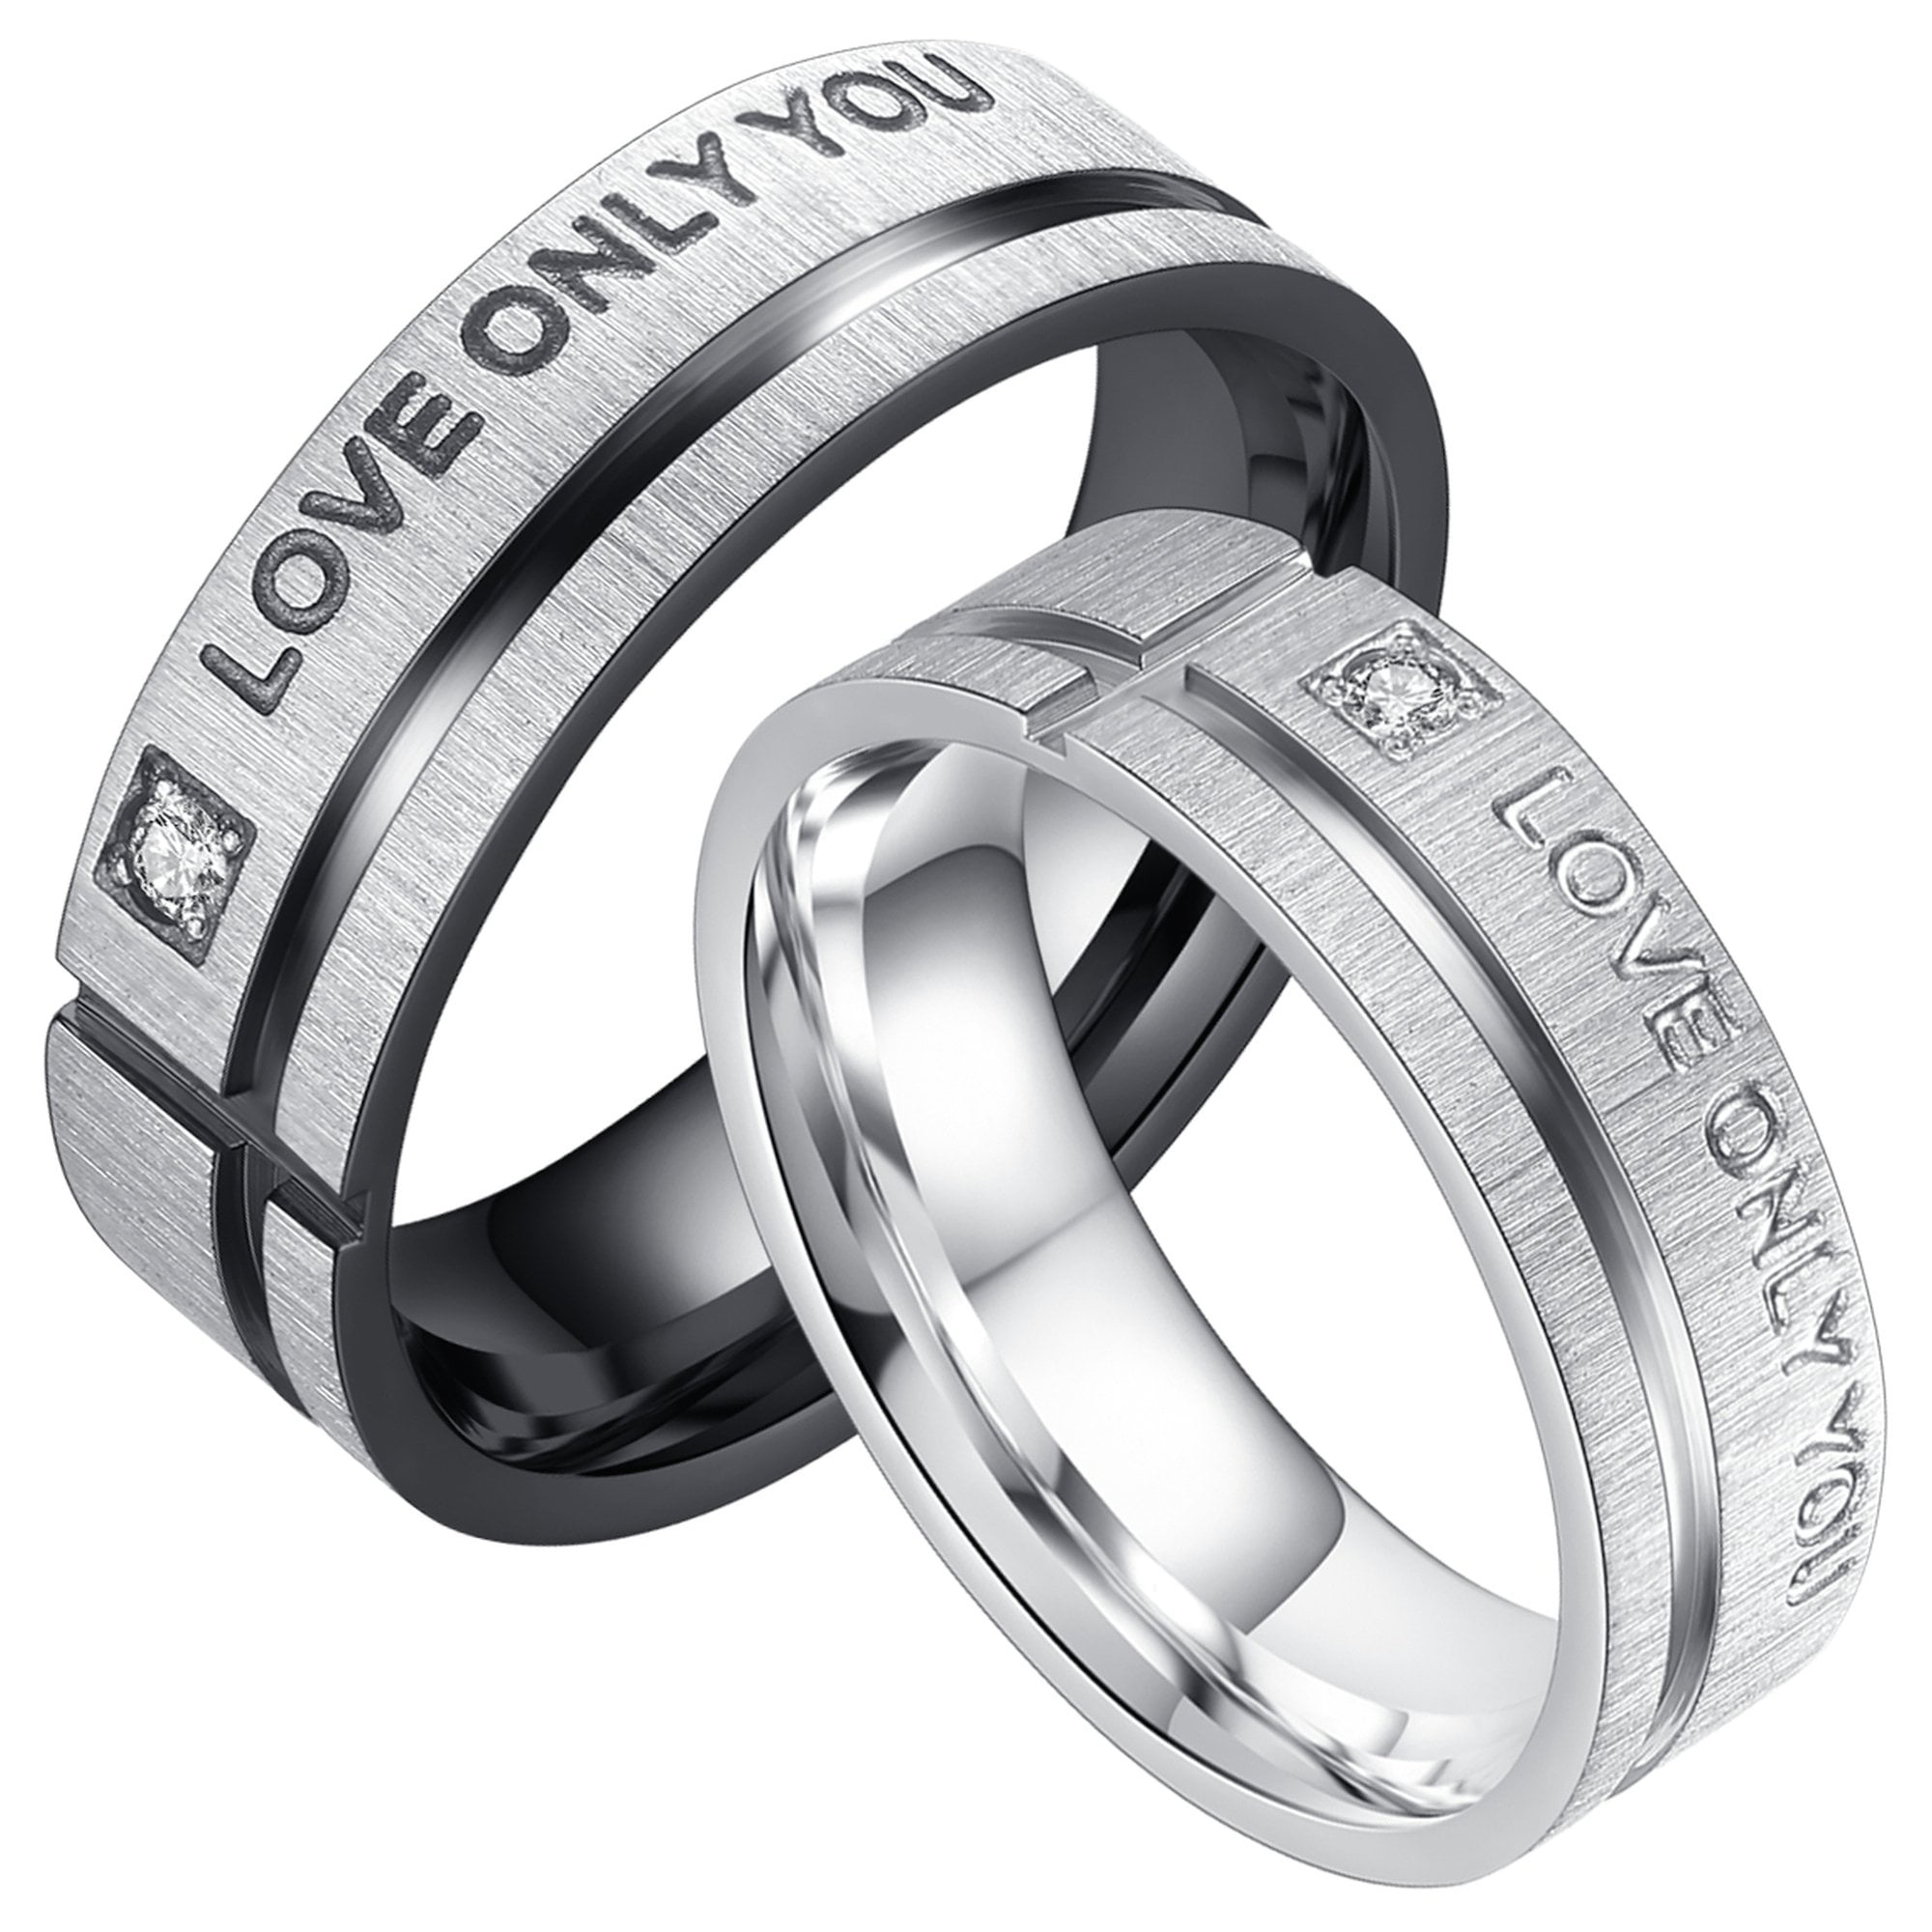 Couple's Promise Ring "Love Only You" His and Her Matching Wedding Band